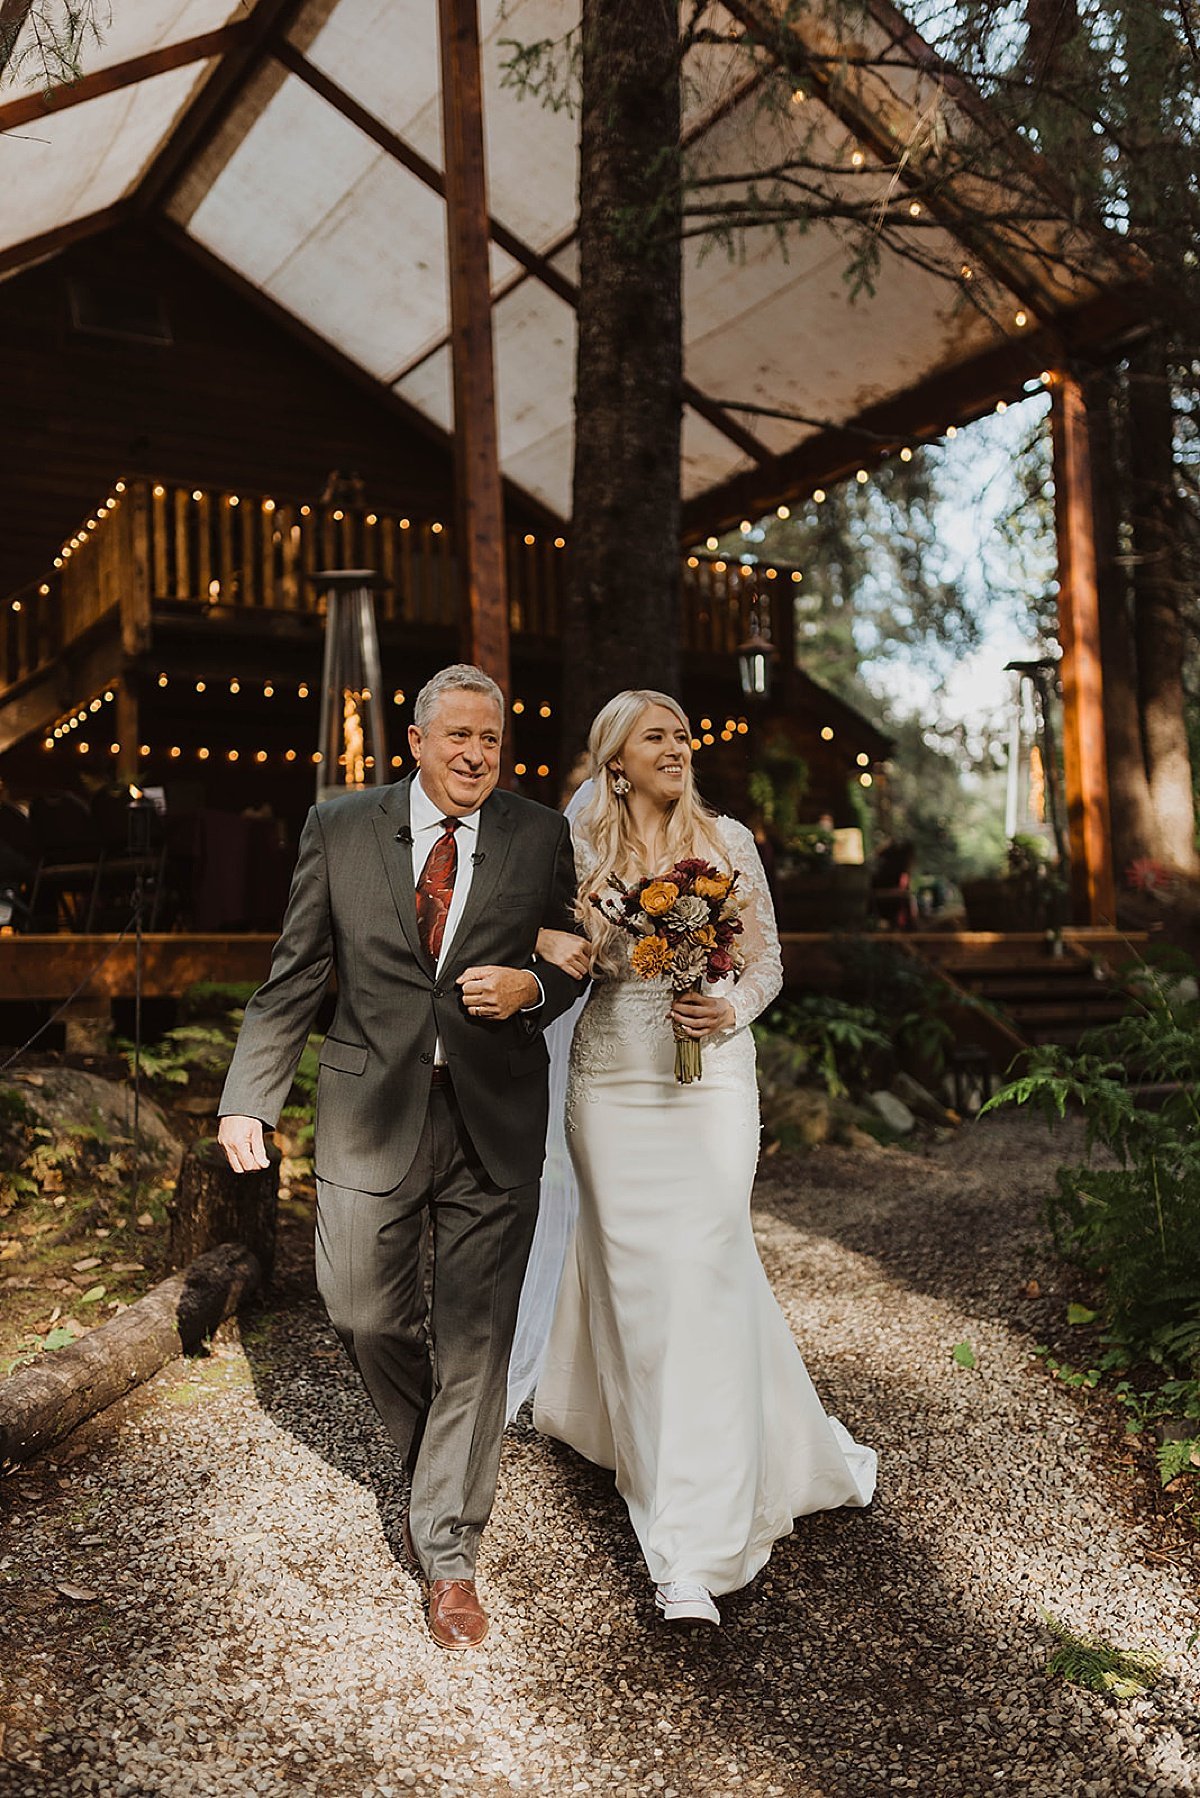  father of the bride walks daughter down the aisle at outdoor moody glacier creek wedding 